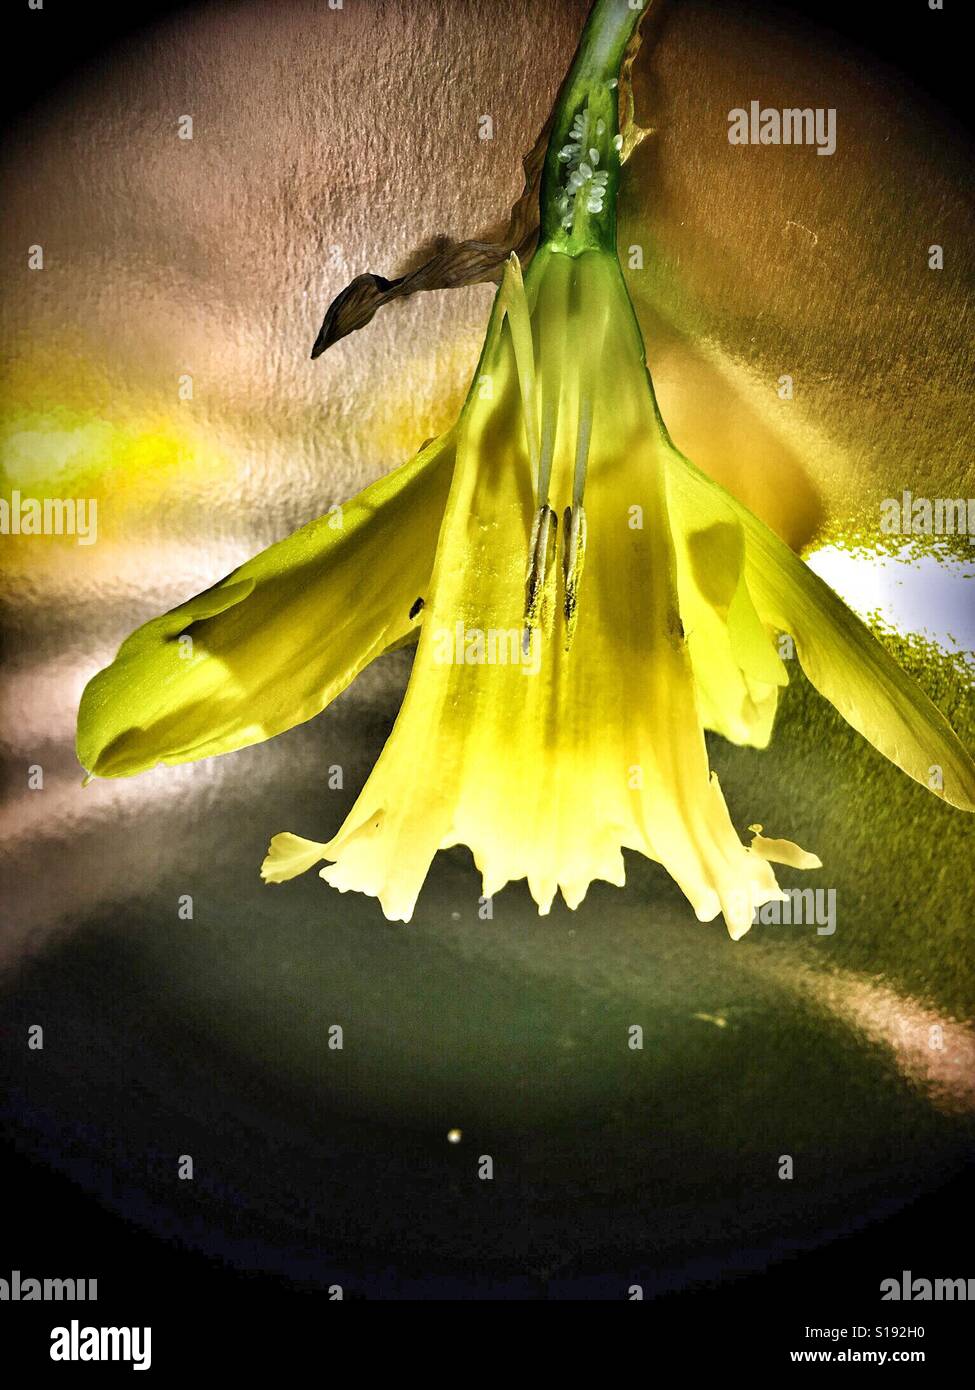 Daffodil flower split open to reveal seeds and stamens Stock Photo